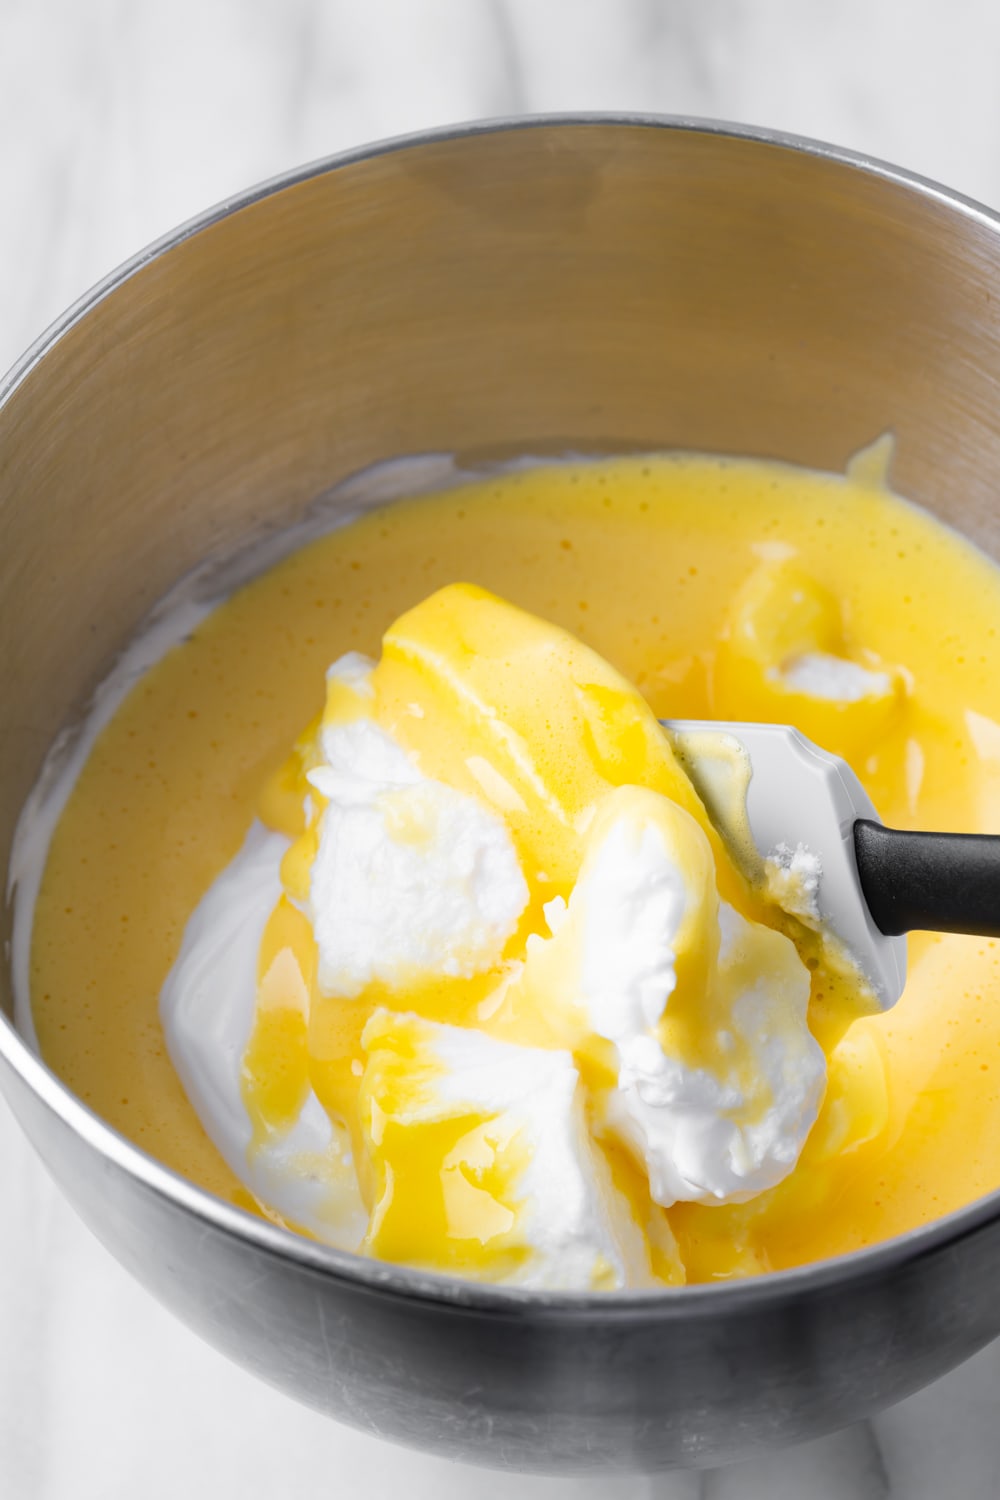 Egg white mixture being folded into a beat egg yolk mixture with a spatula all in a silver bowl to make the batter for brazo gitano